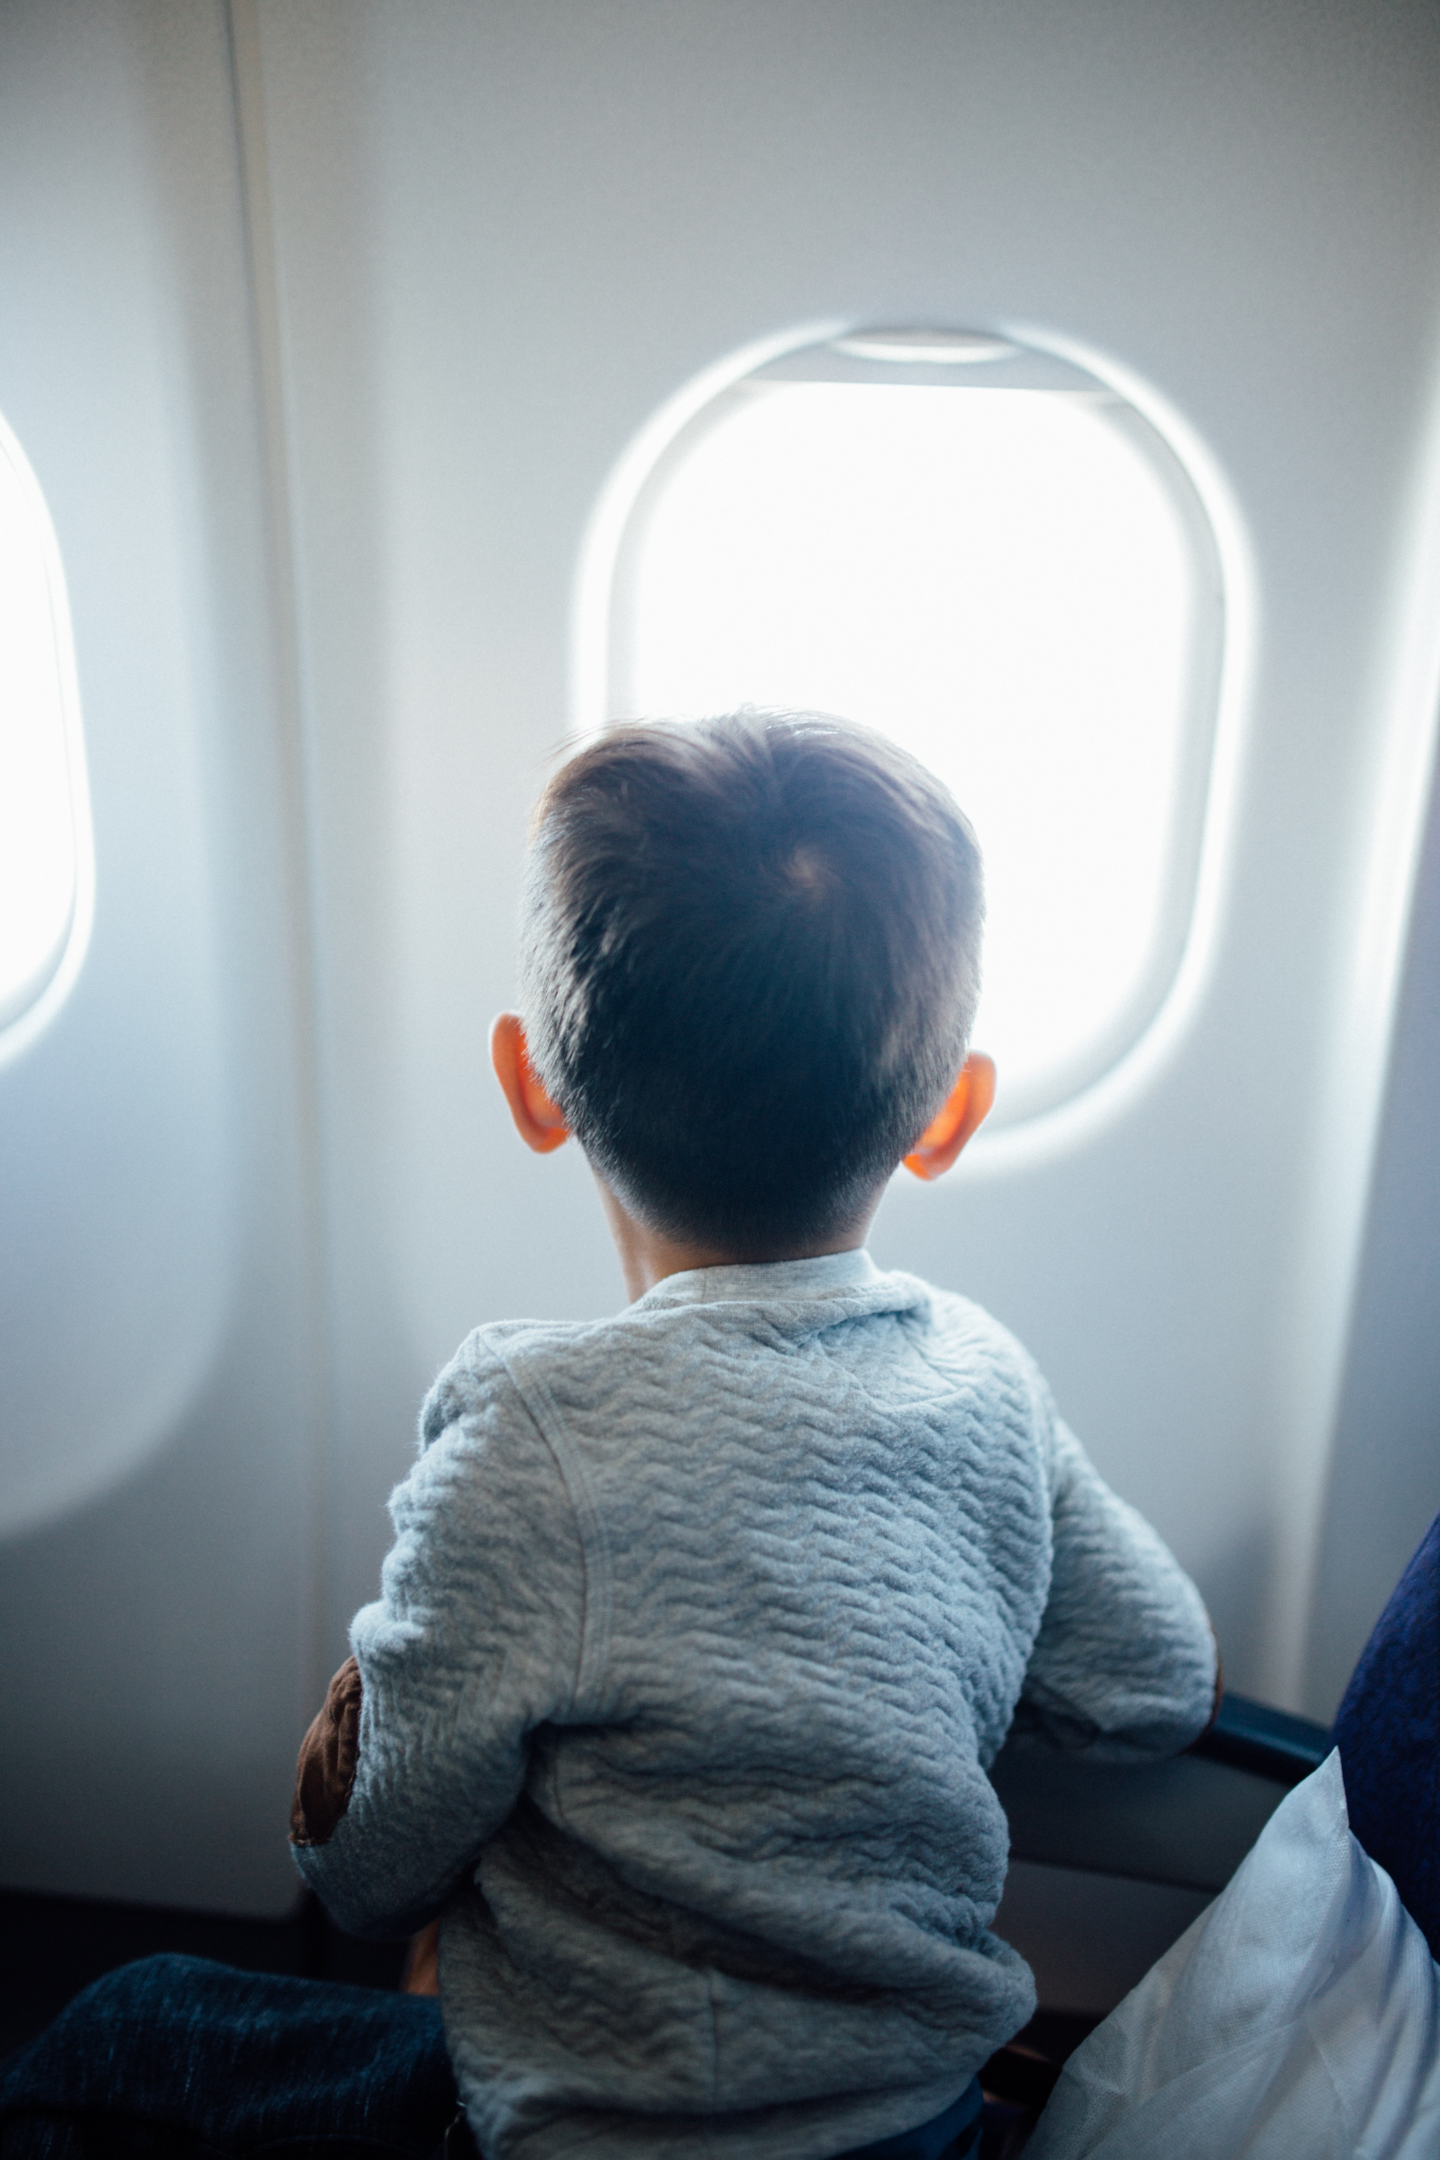 Photo of a kid looking at the window inside an airplane